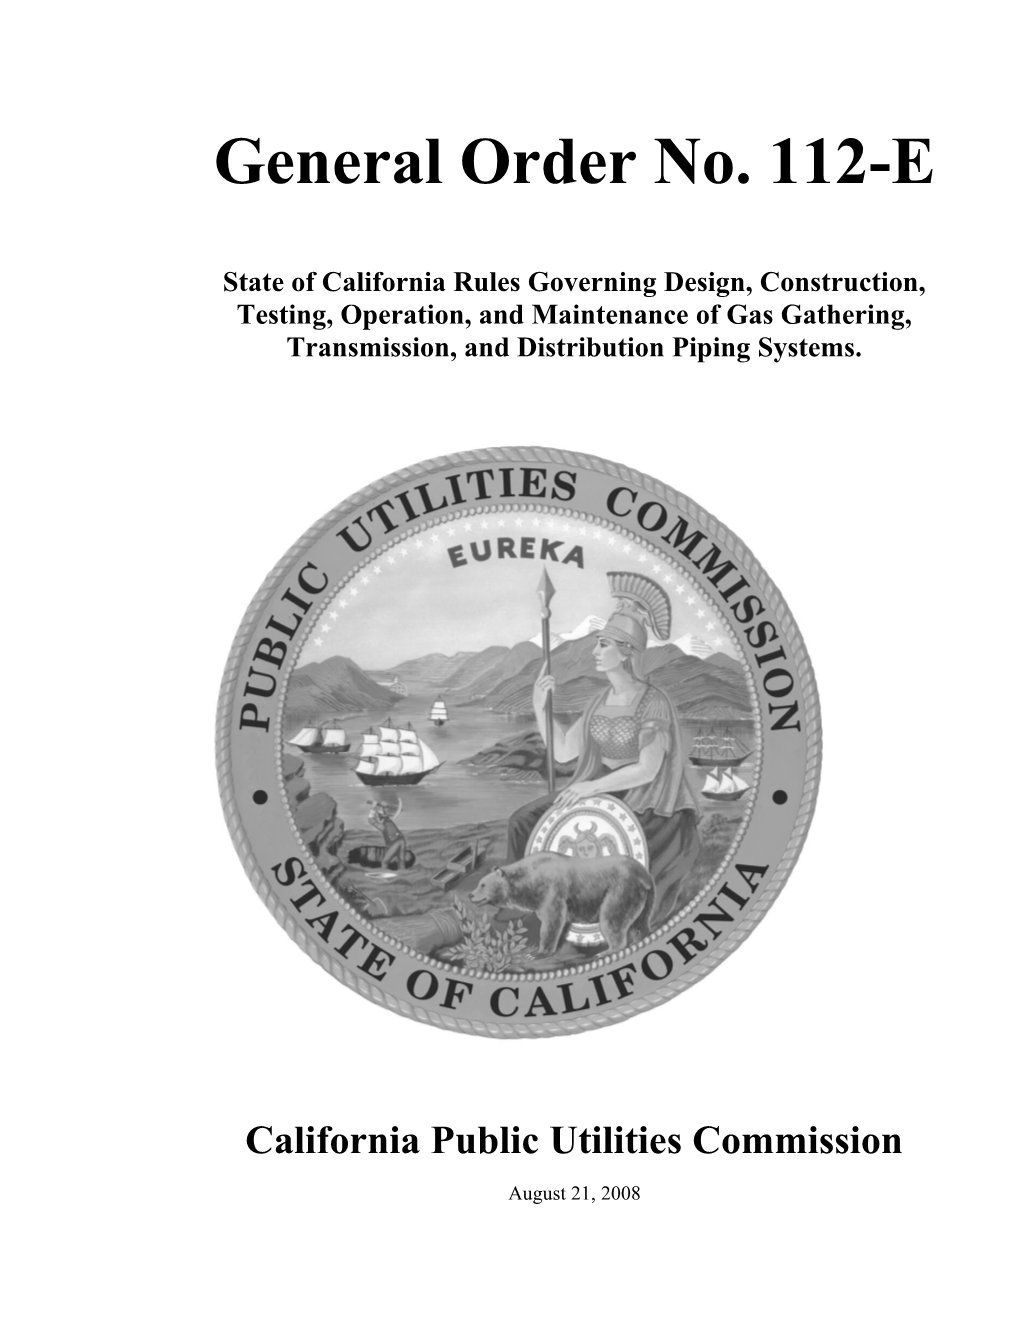 State of California Rules Governing Design, Construction